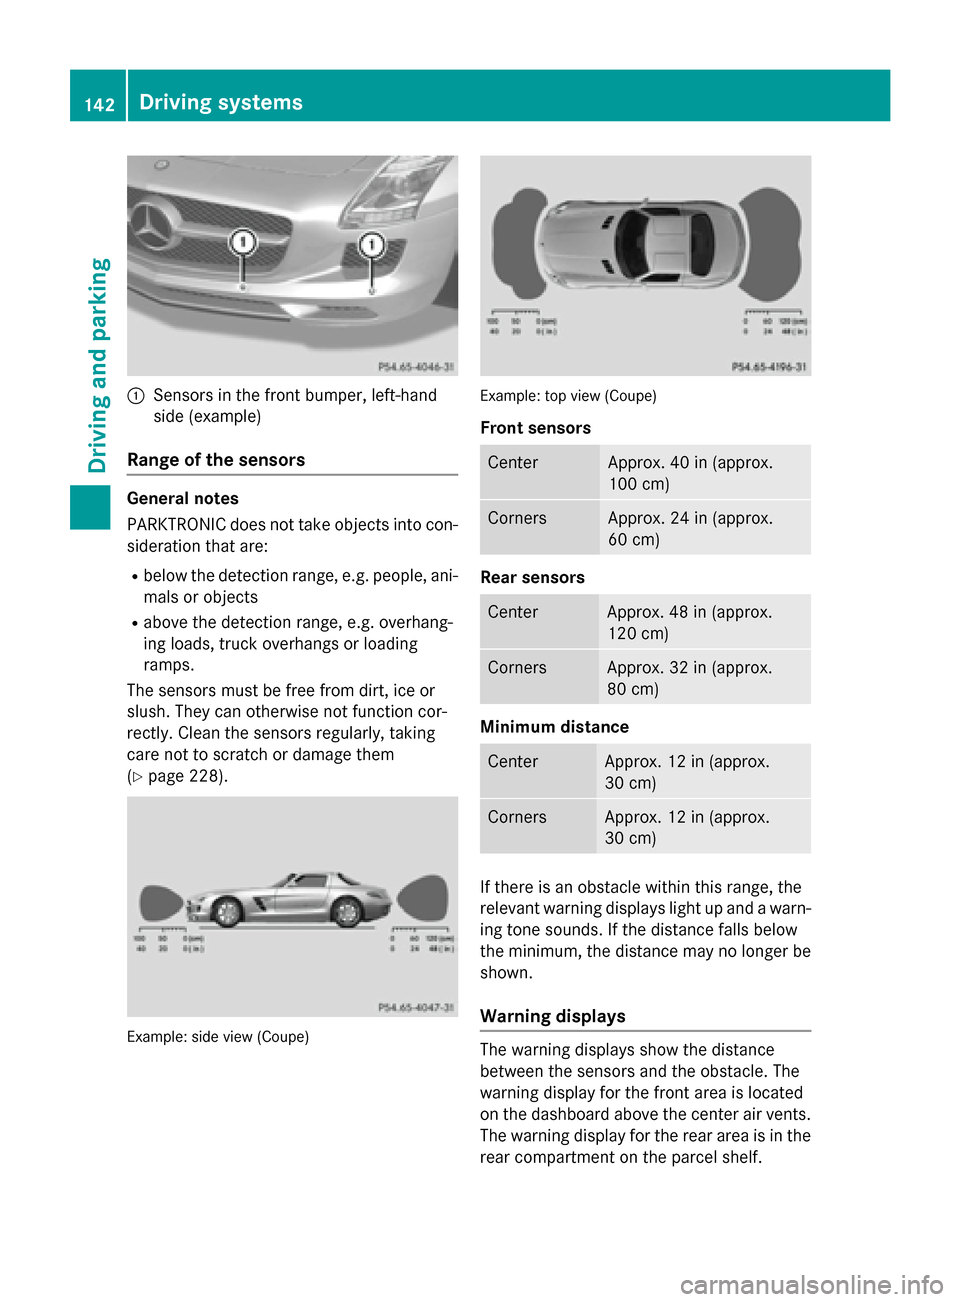 MERCEDES-BENZ SLS AMG GT ROADSTER 2015 C197 Owners Manual 0043
Sensors in the front bumper, left-hand
sid e(example)
Rang eoft he sensors General notes
PARKTRONIC doe
snot take objects into con-
sideration tha tare:
R belo wthe detectio nrange, e.g. people, 